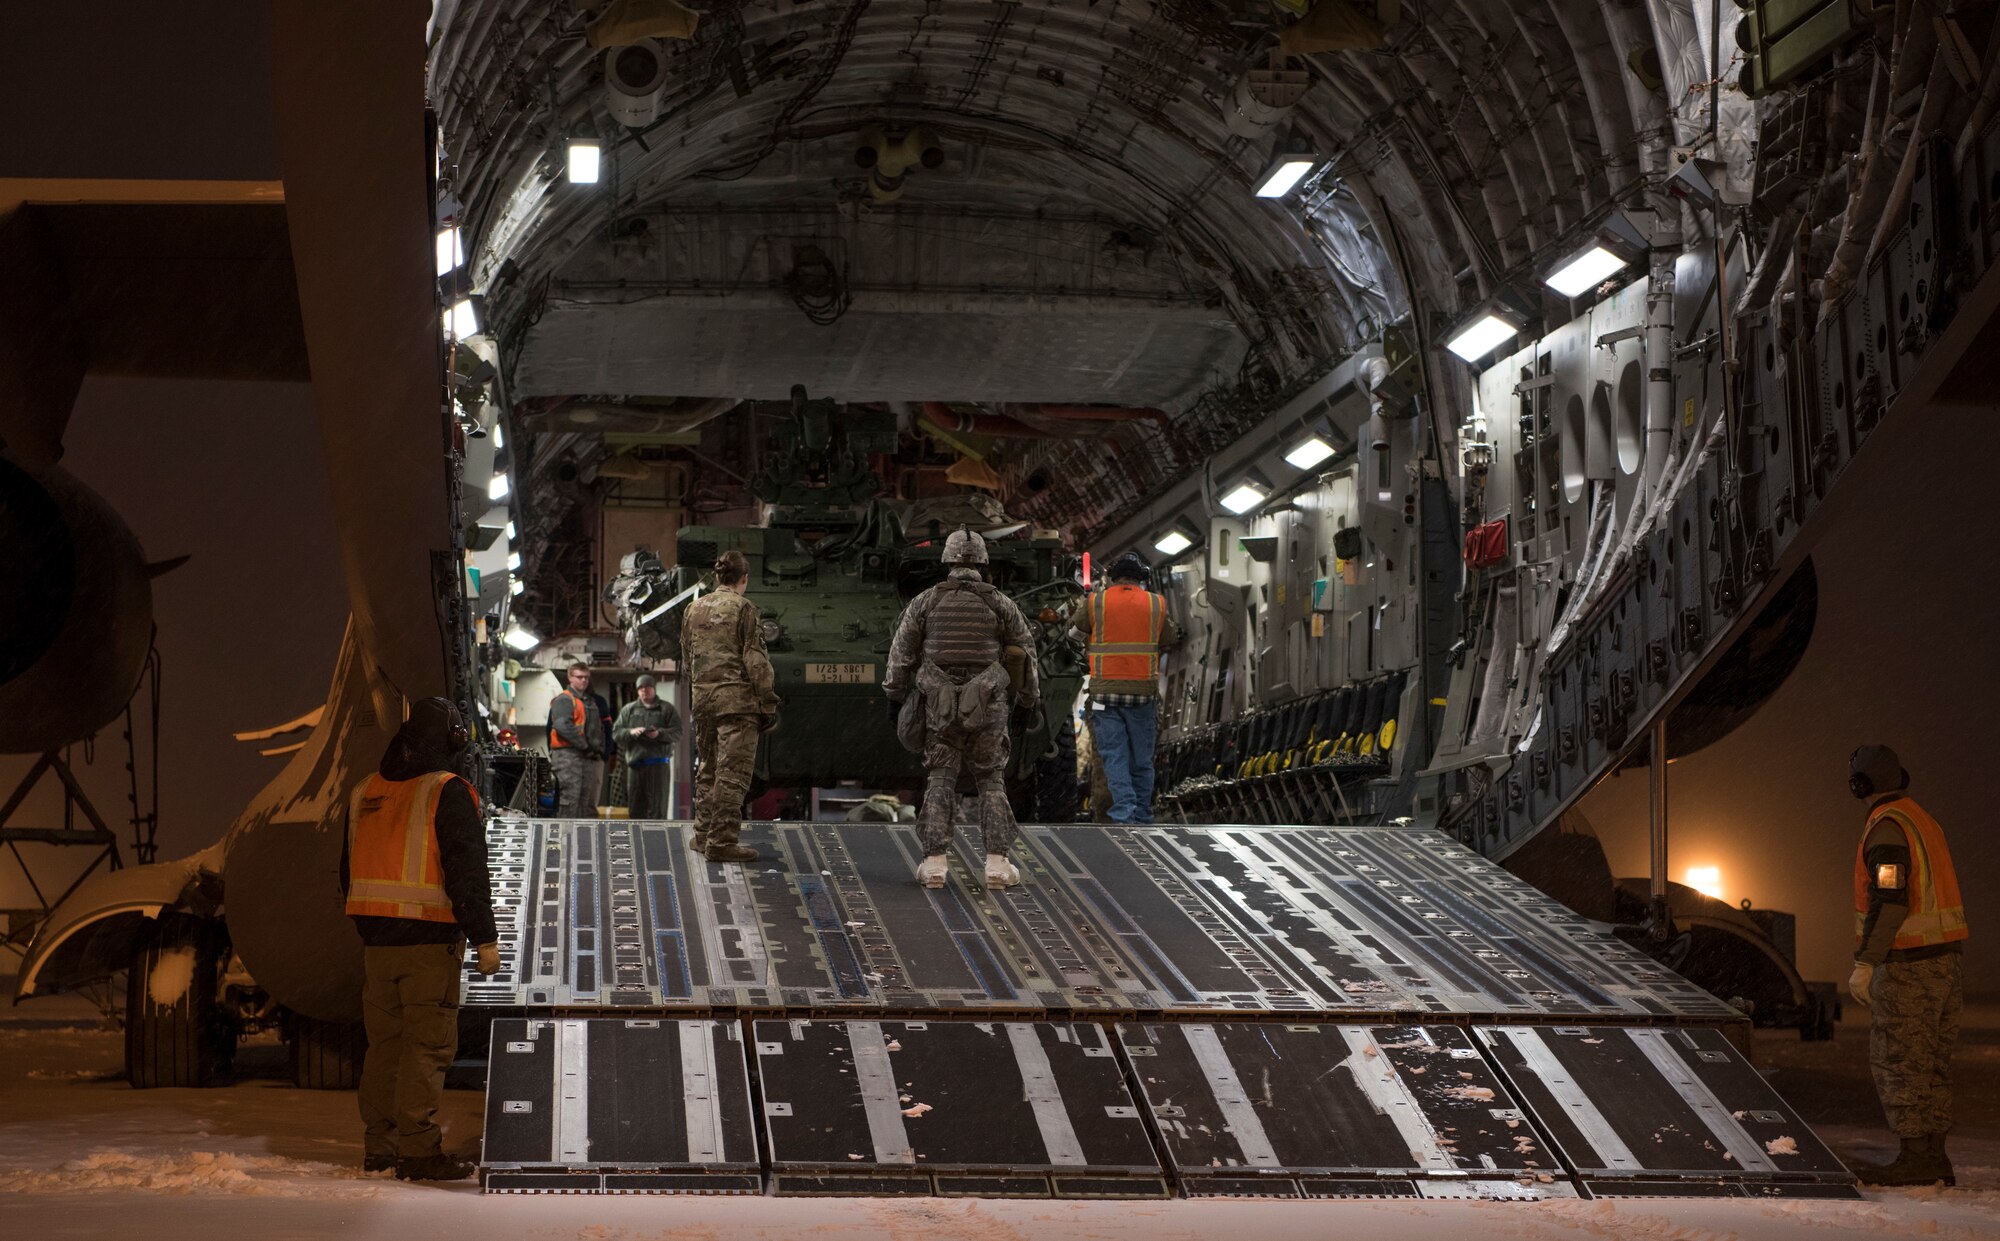 U.S. Air Force Airmen and U.S. Army Soldiers work together to load an Interim Armored Vehicle Stryker into a C-17 Globemaster III during Exercise Artic Pegasus at Elmendorf Air Force Base, Alaska, March 13, 2018. The purpose of the exercise was to practice cold-weather operations in Deadhorse, Alaska. (U.S. Air Force photo by Senior Airman Tryphena Mayhugh)